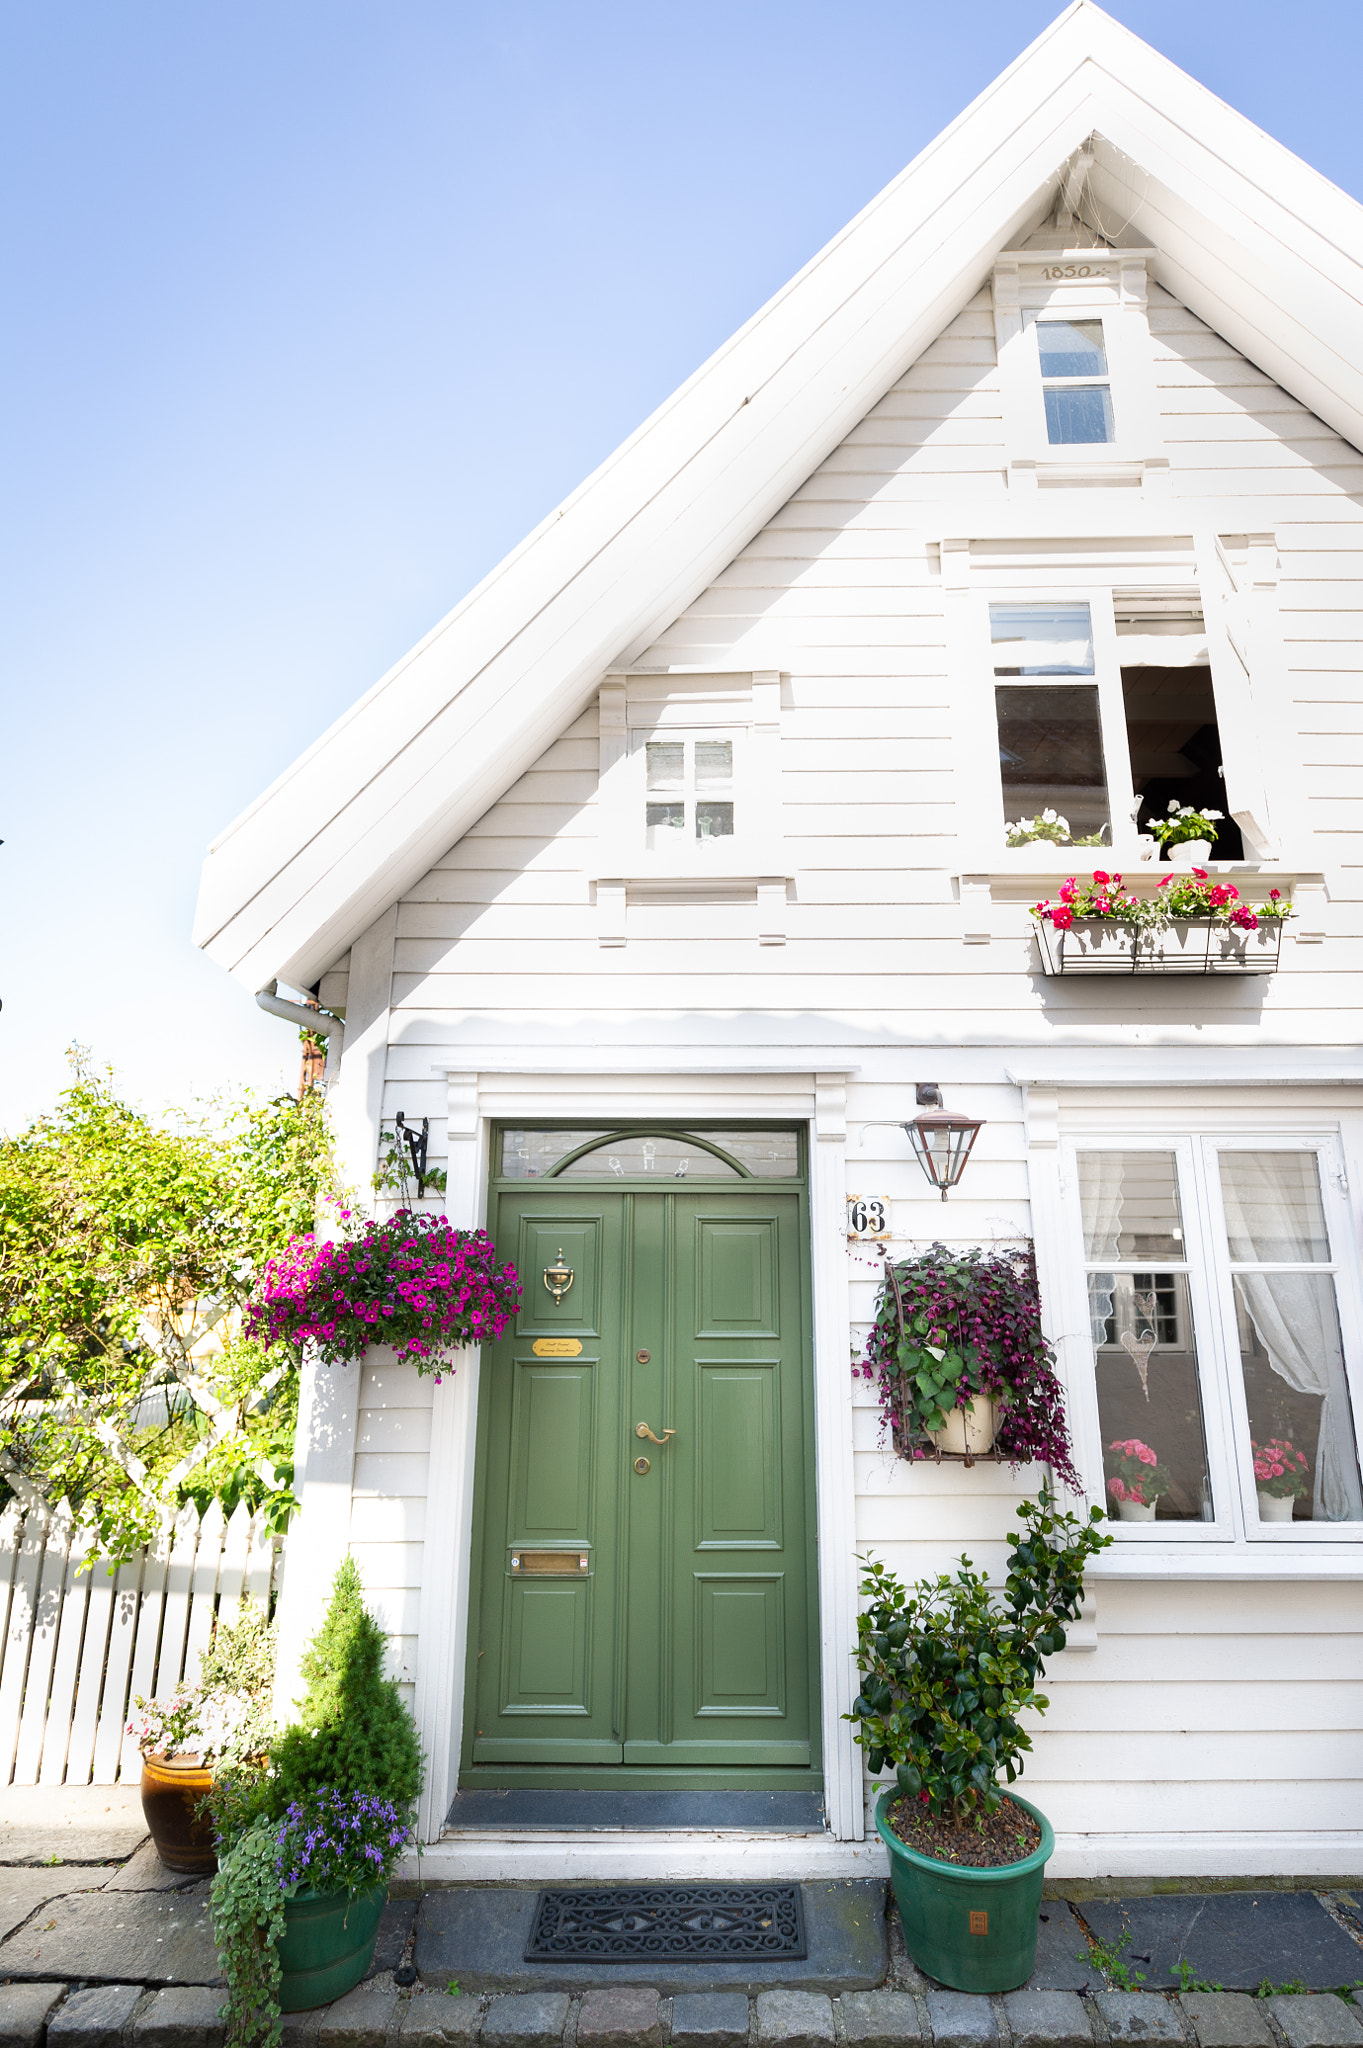 Old White Wooden House In Summer With Green Door